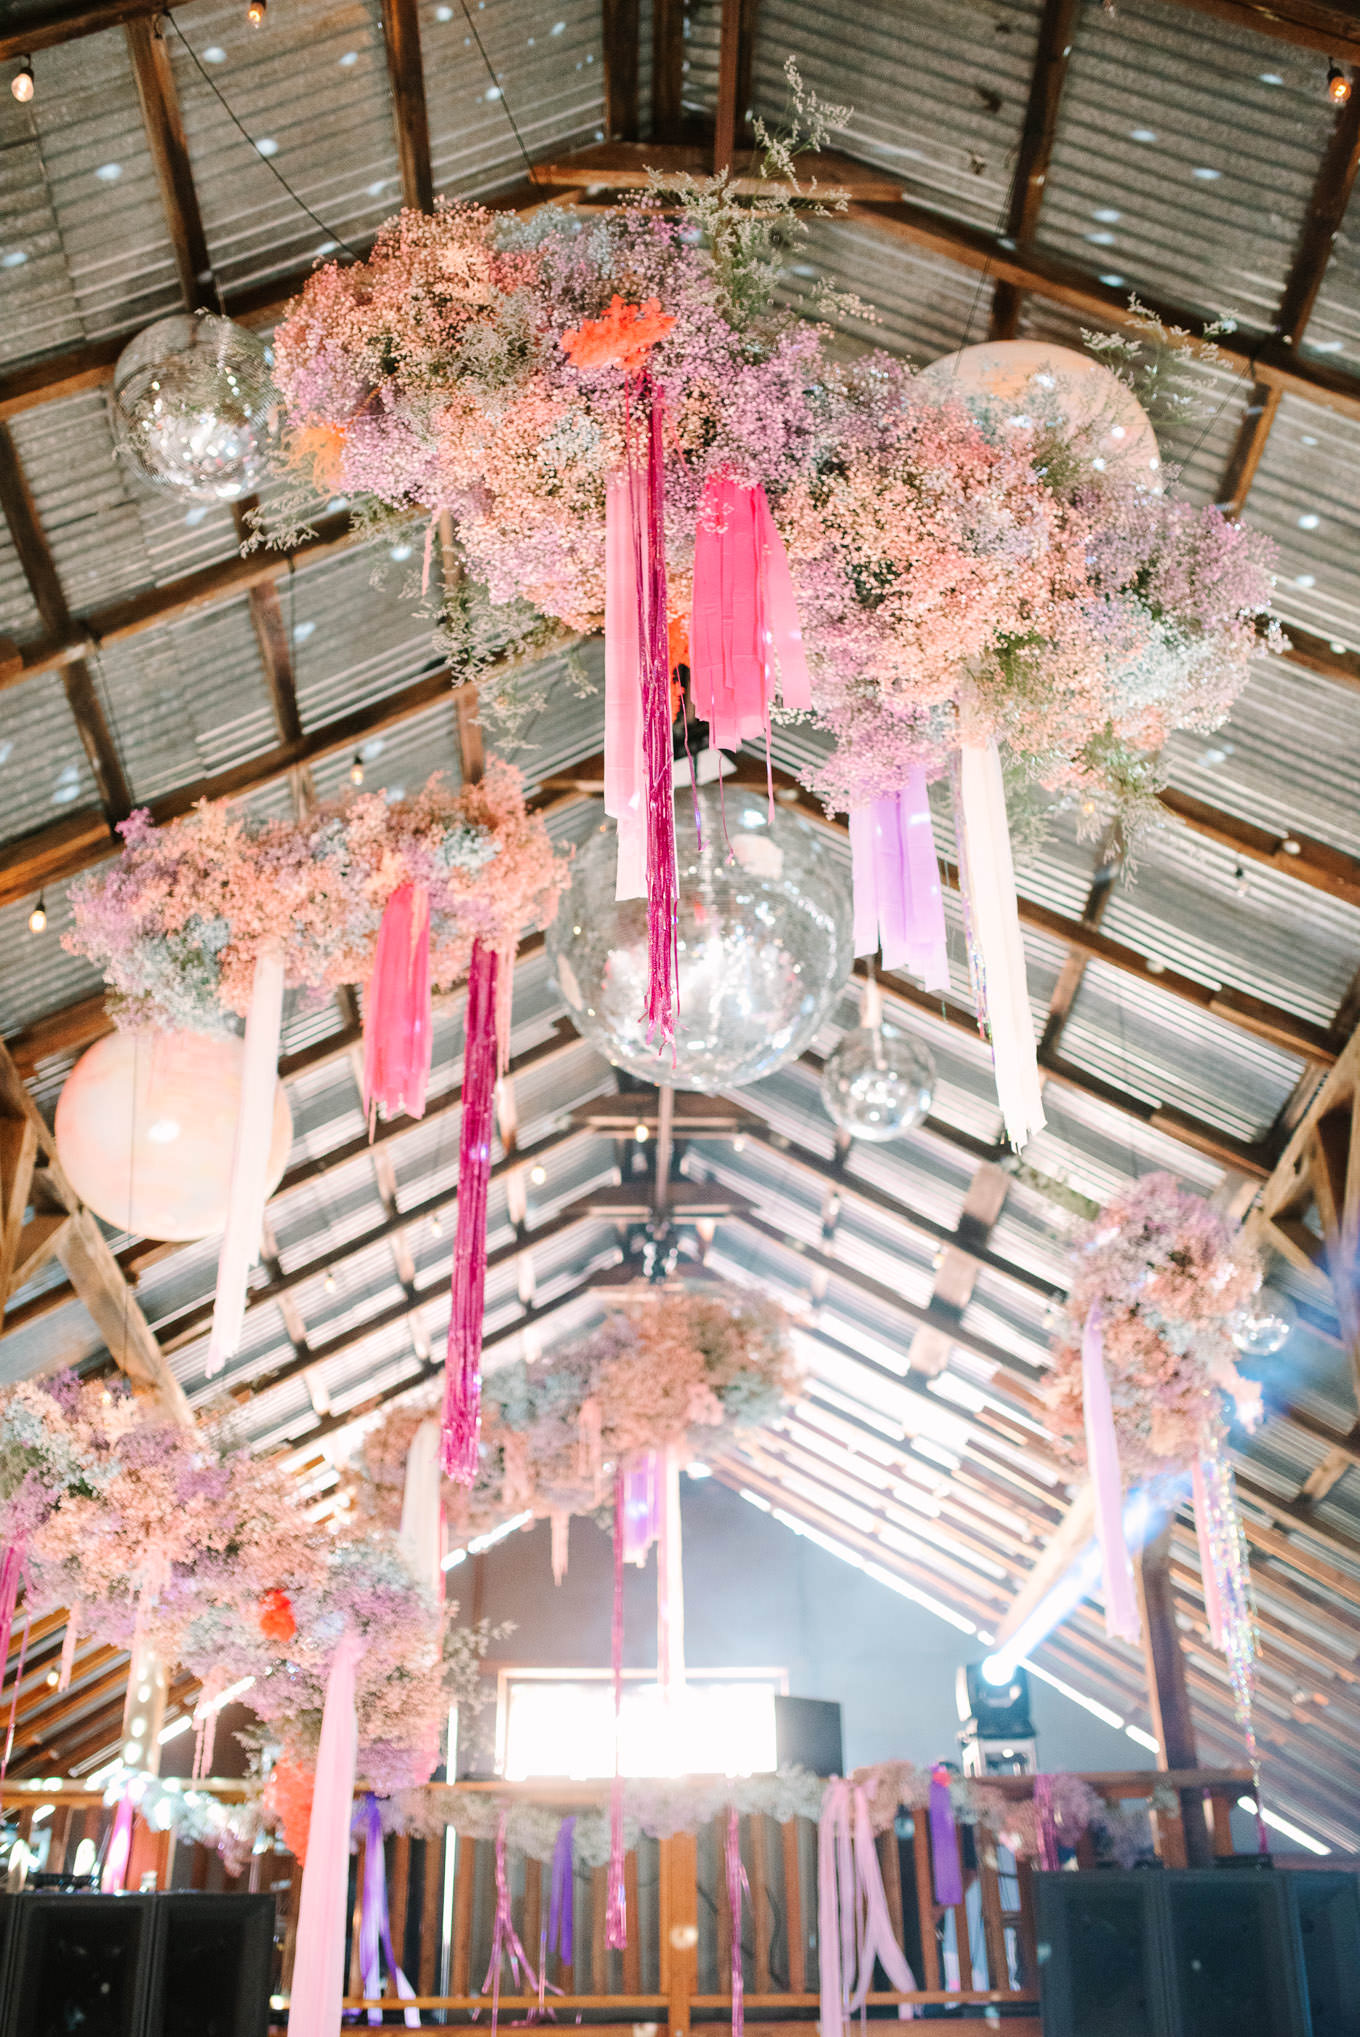 Whimsical disco ball and baby's breath wedding reception installation | Colorful and quirky wedding at Higuera Ranch in San Luis Obispo | #sanluisobispowedding #californiawedding #higueraranch #madonnainn   
Source: Mary Costa Photography | Los Angeles
